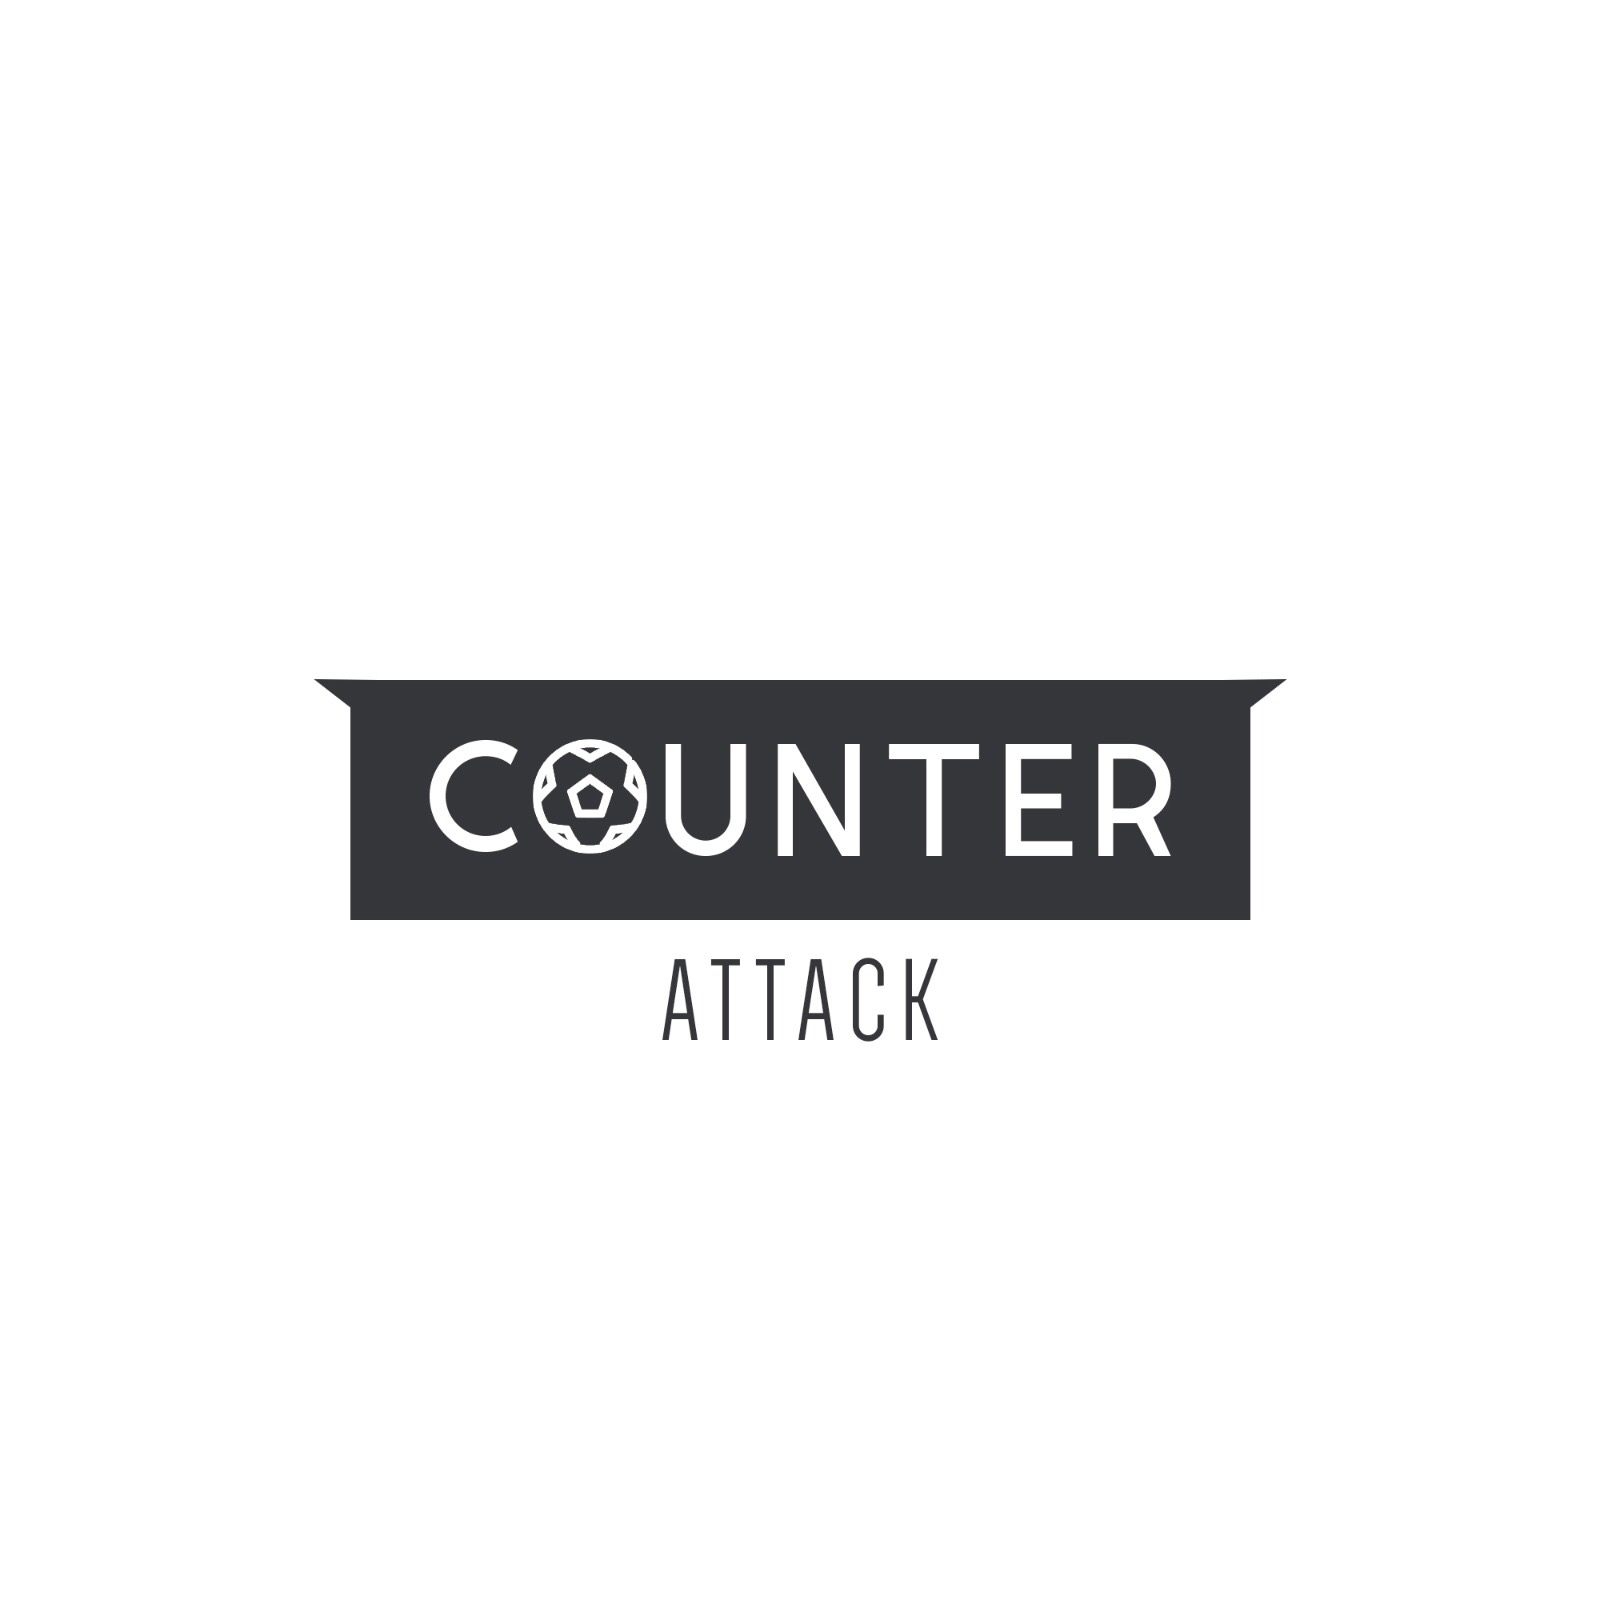 Counter Attack - Episode 72 - Goals Never Done With Chris Dickson